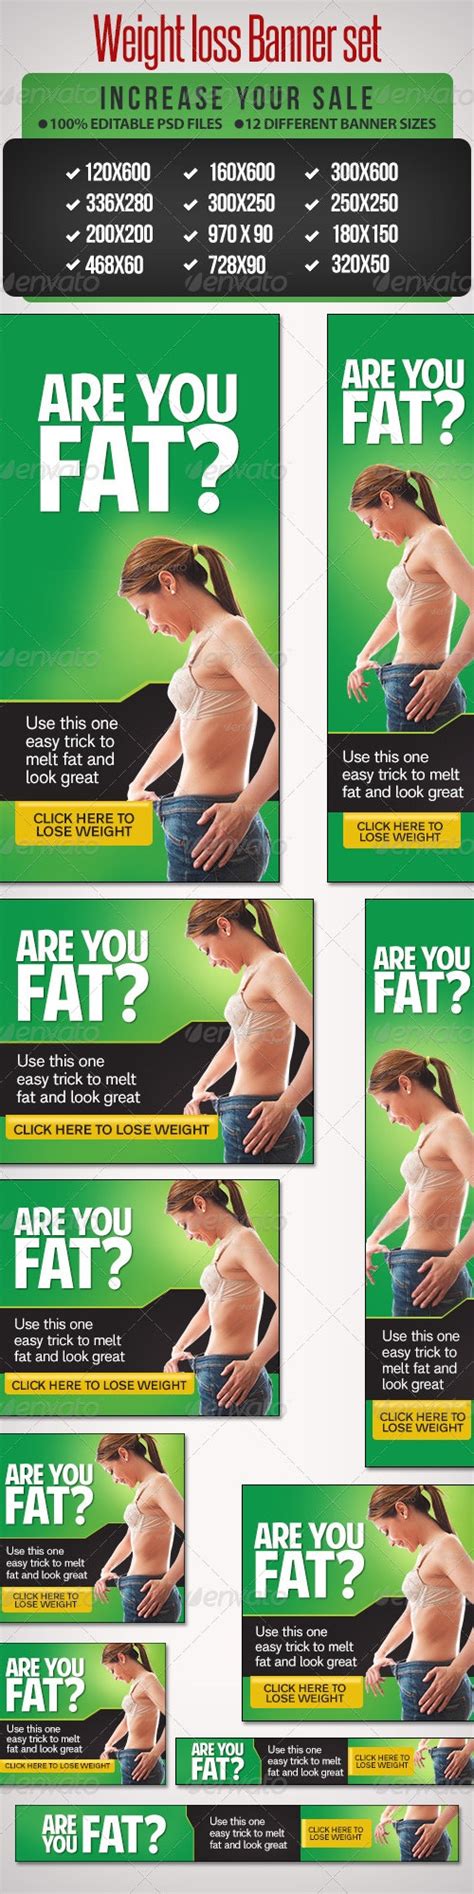 Weight Loss Banner Set 10 By Kimpio Graphicriver